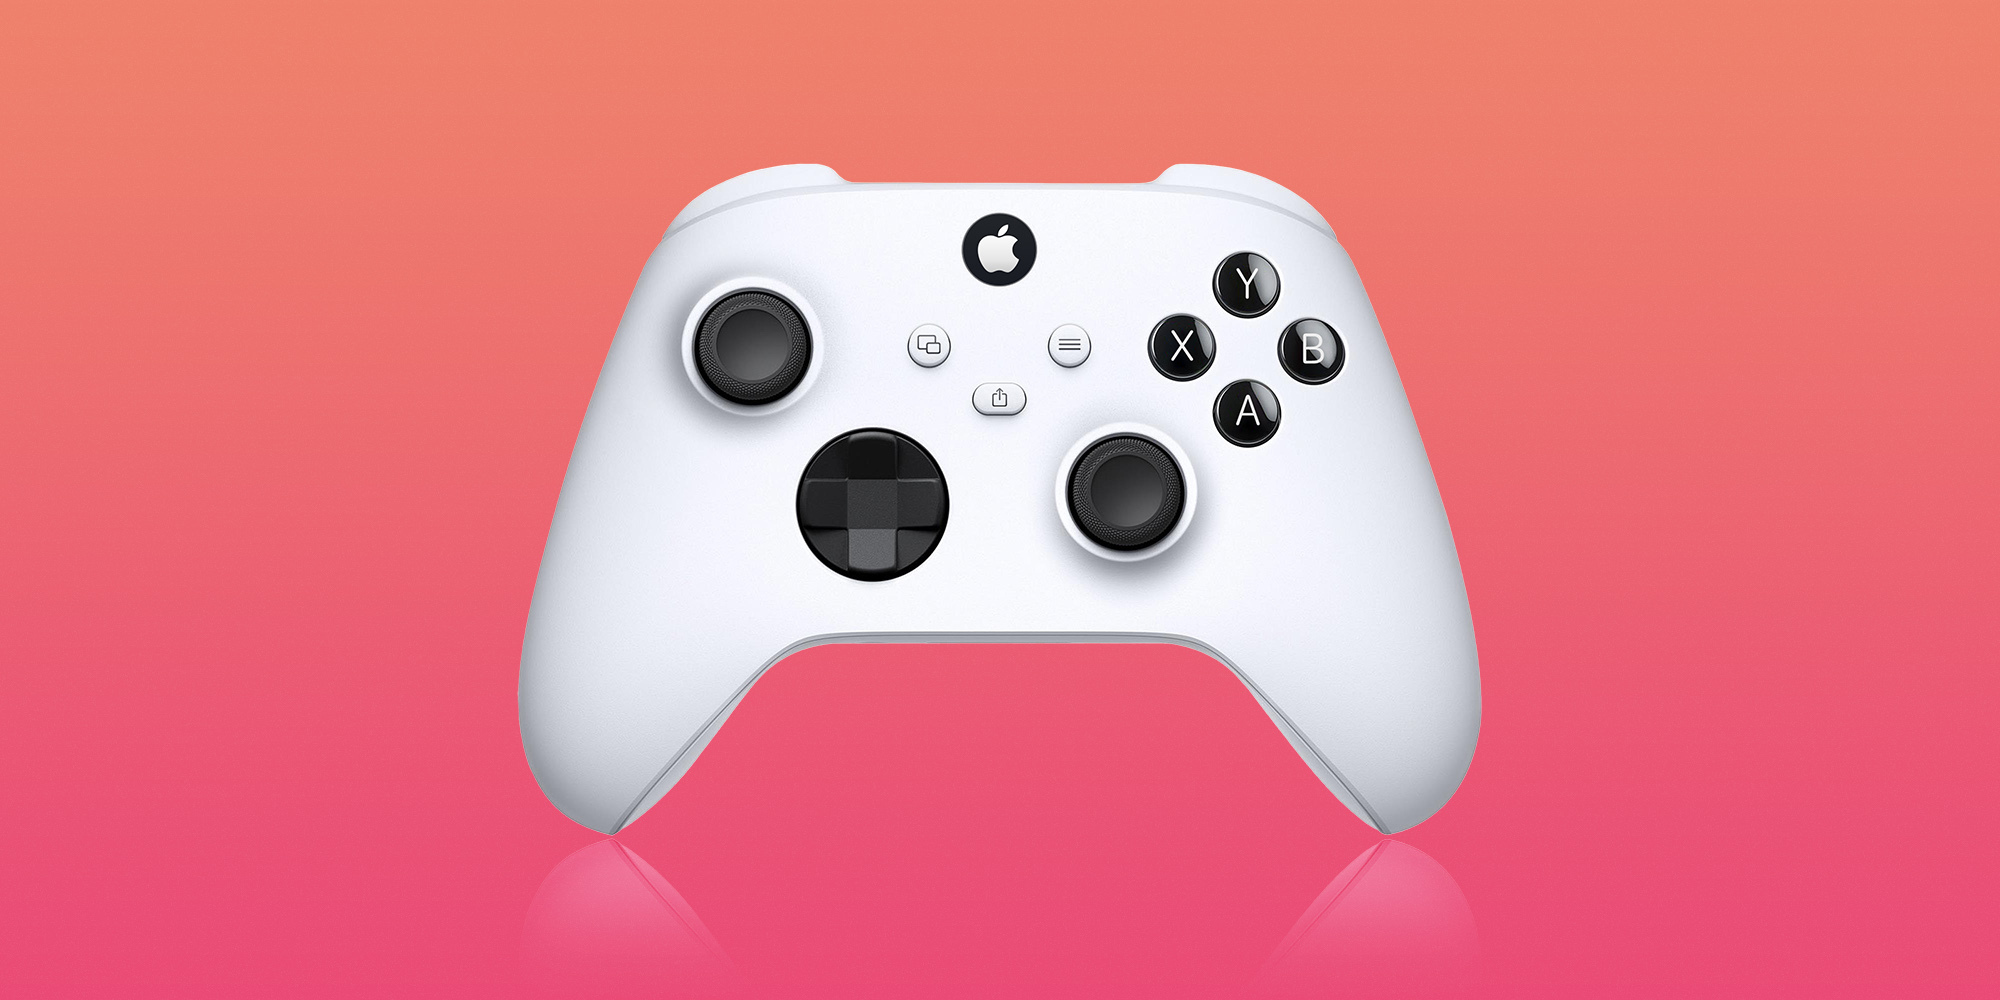 Voetganger Productie kathedraal Poll: Would you buy an Apple-branded game controller? - 9to5Mac